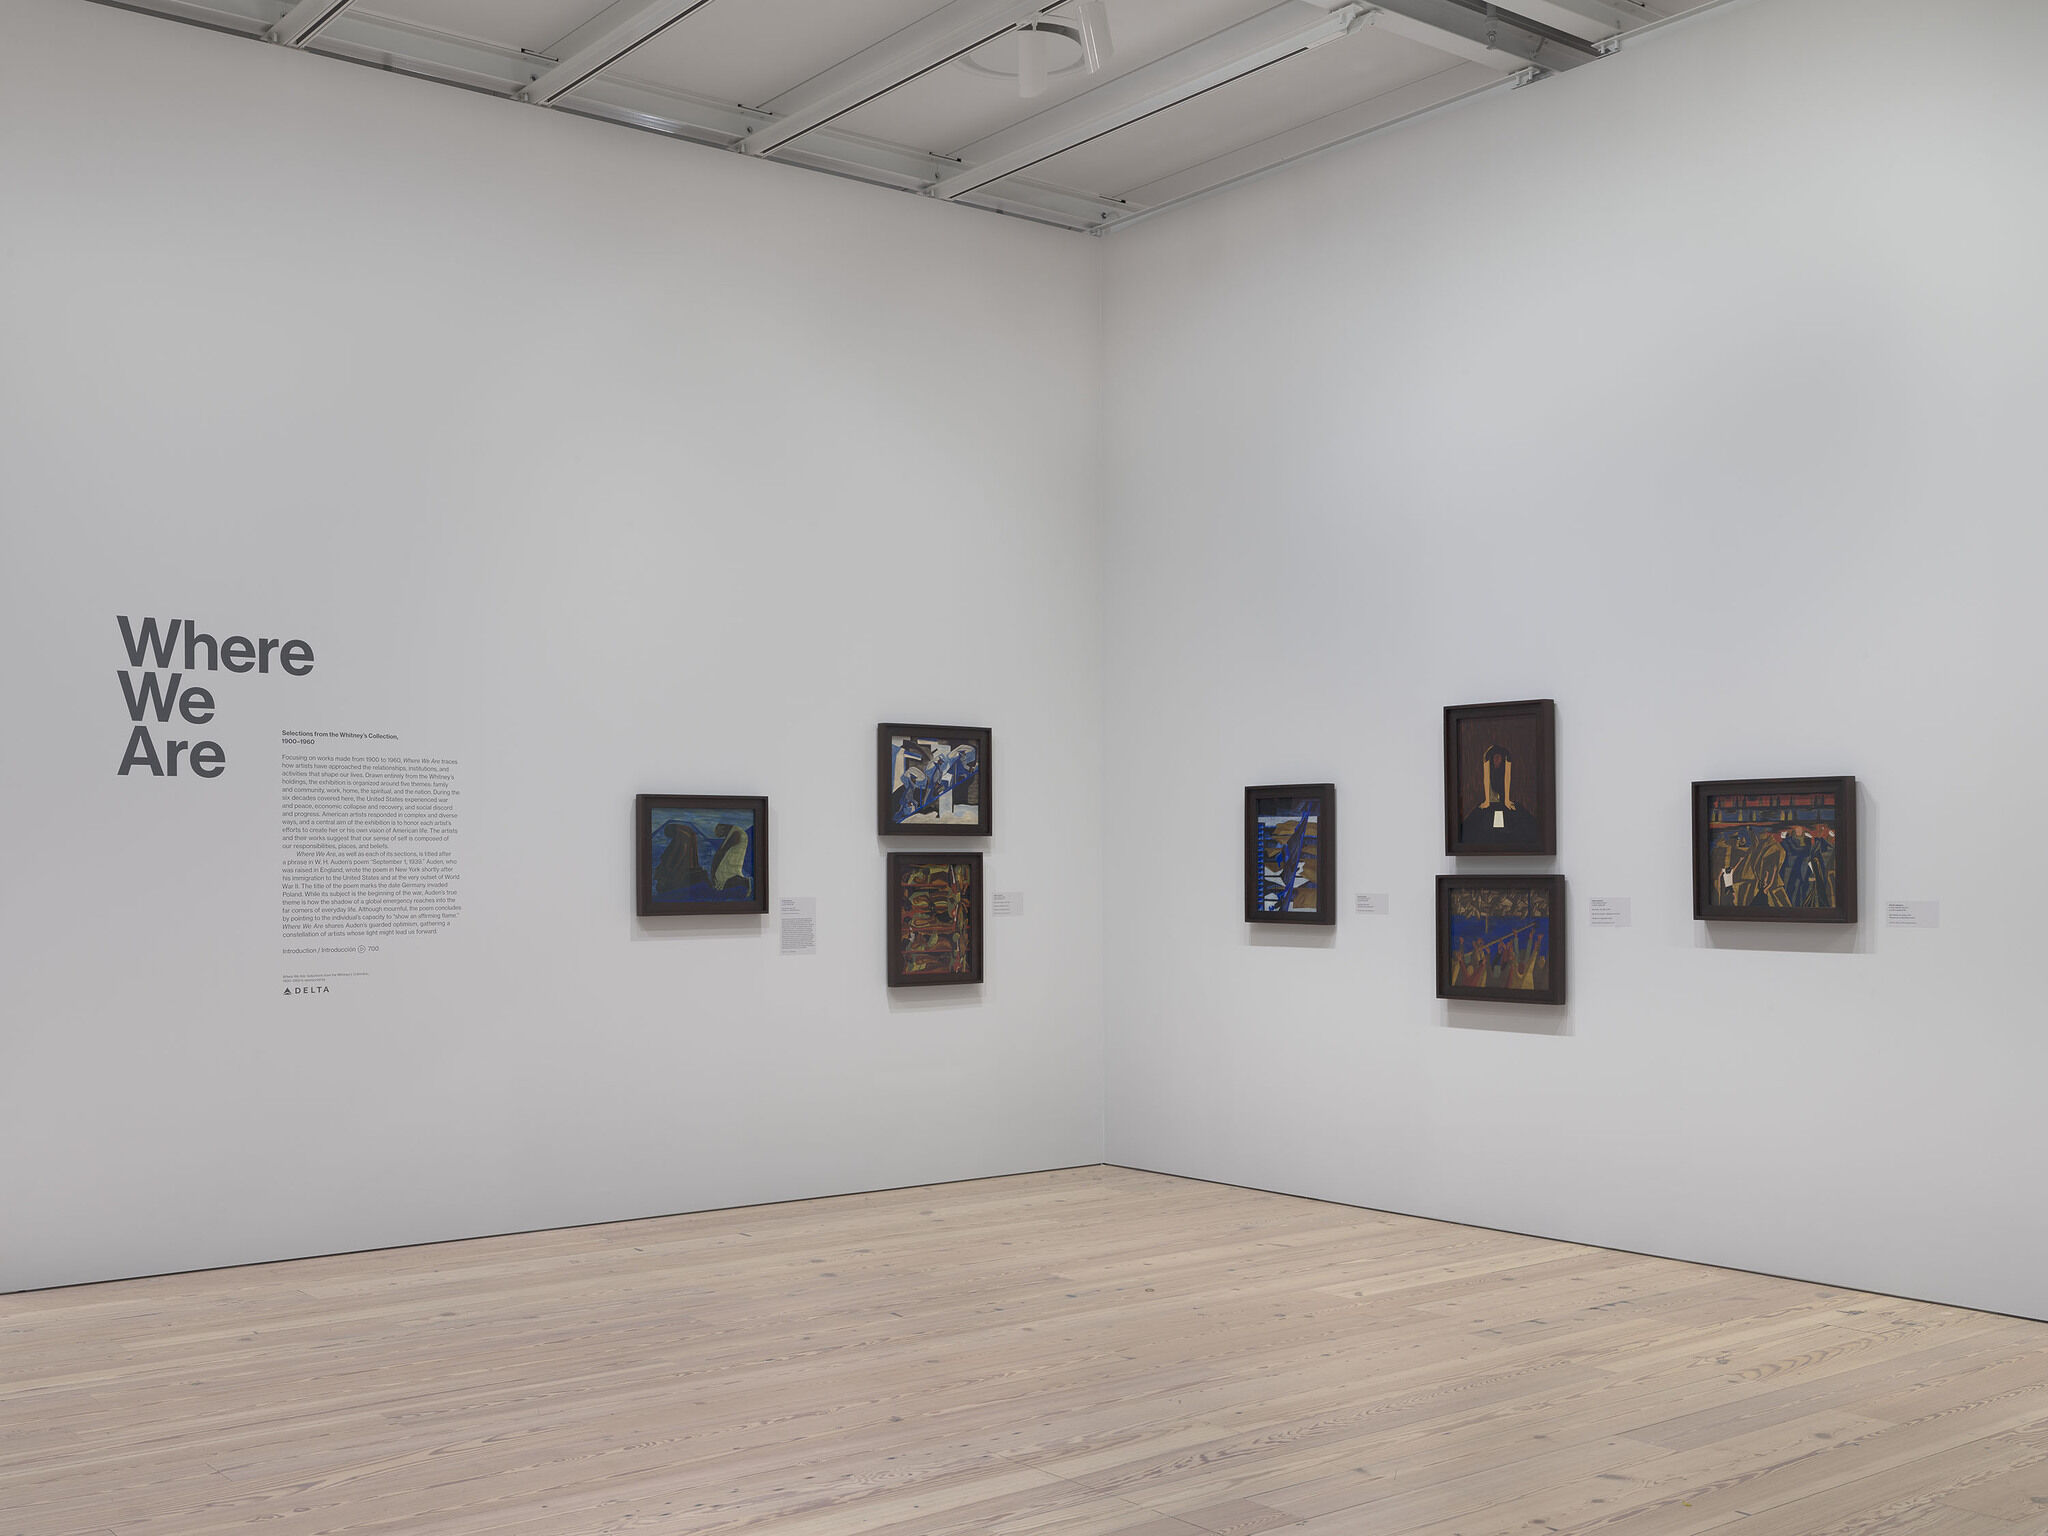 A gallery with wall text and art.